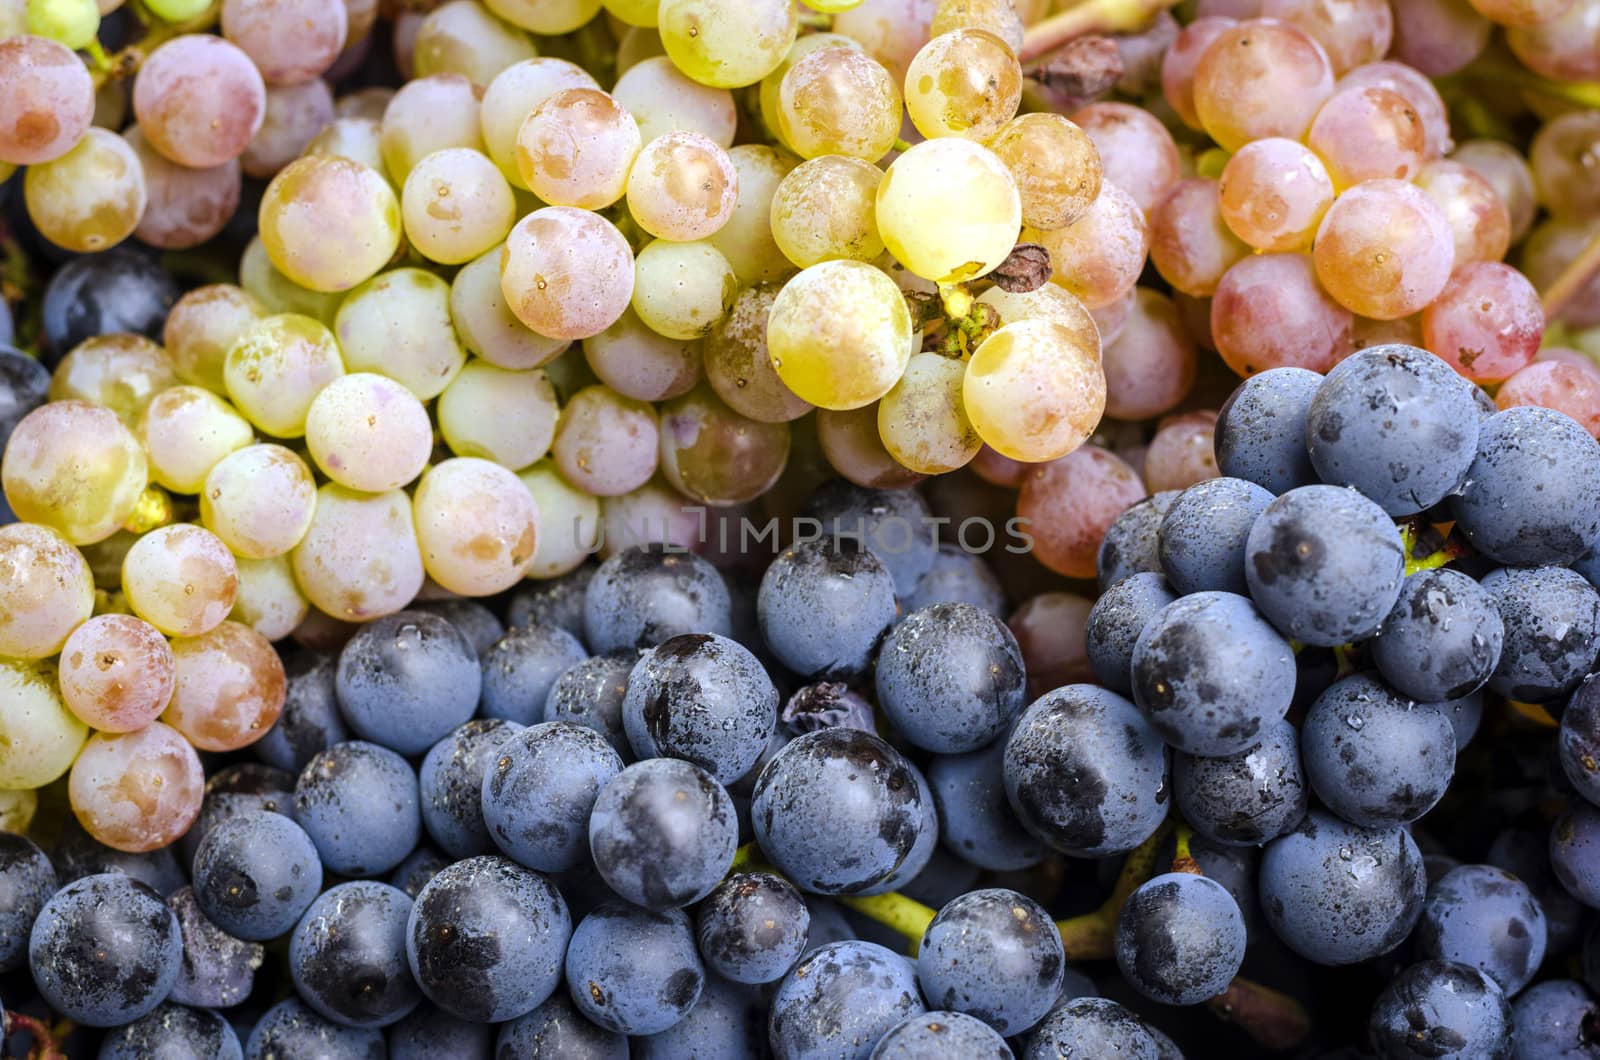 Blue and white grape clusters by Anzemulec